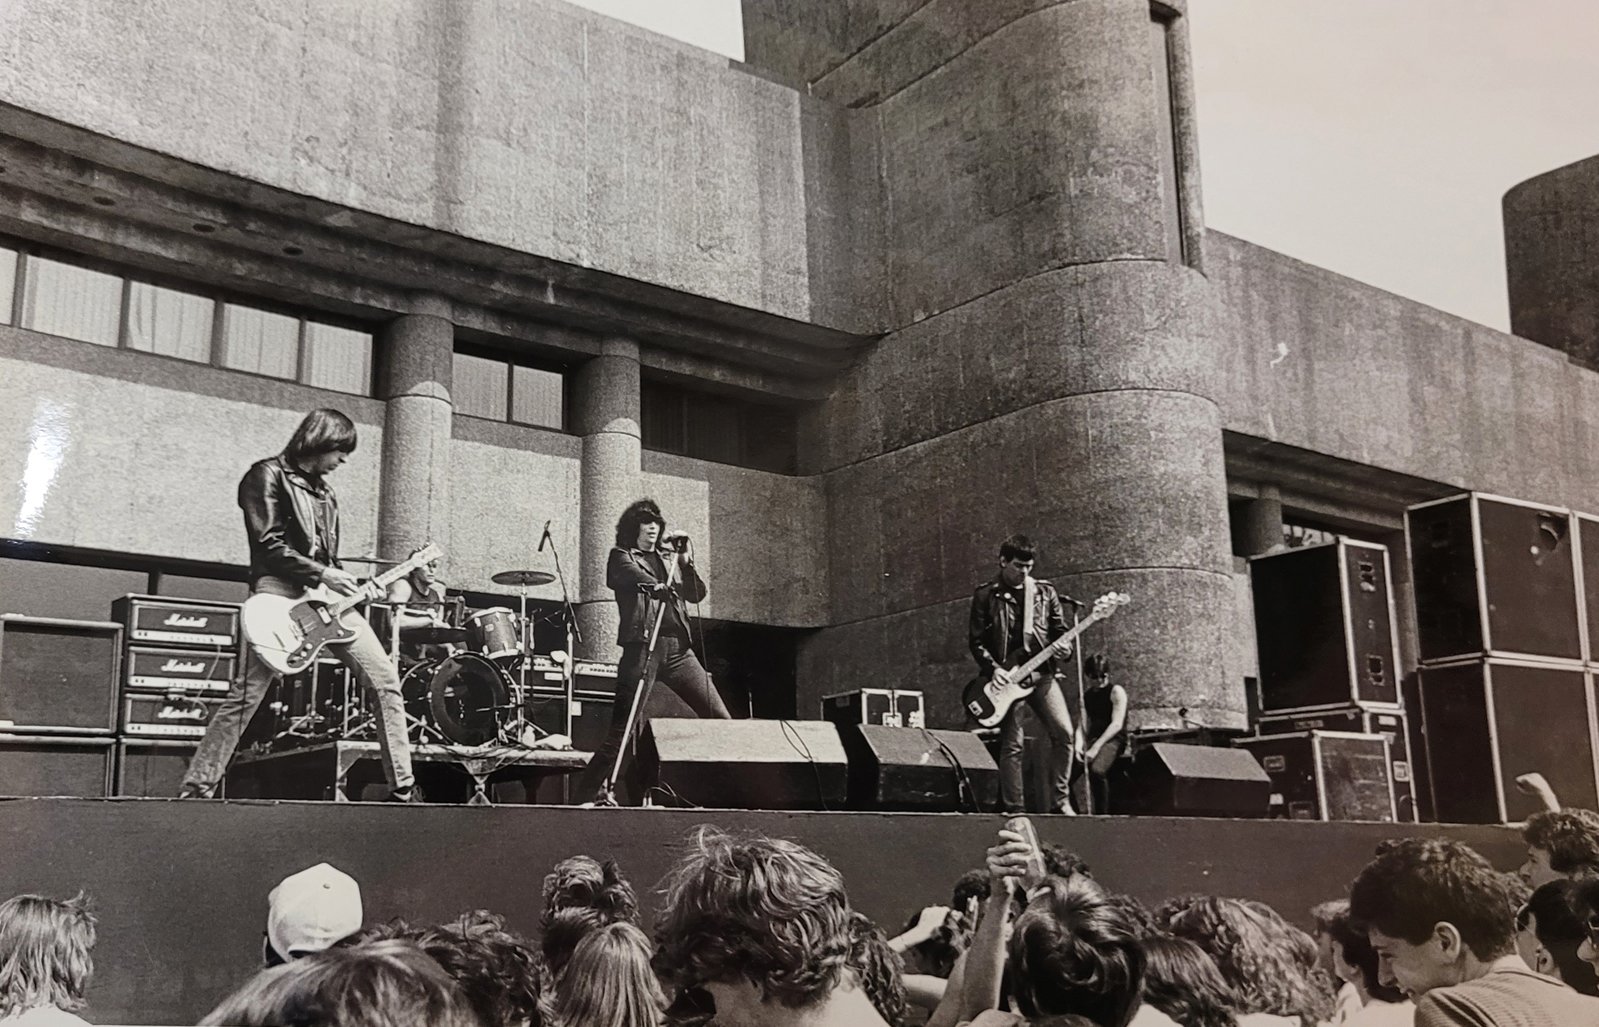 The Ramones playing in front of the Life Sciences Center in 1985.